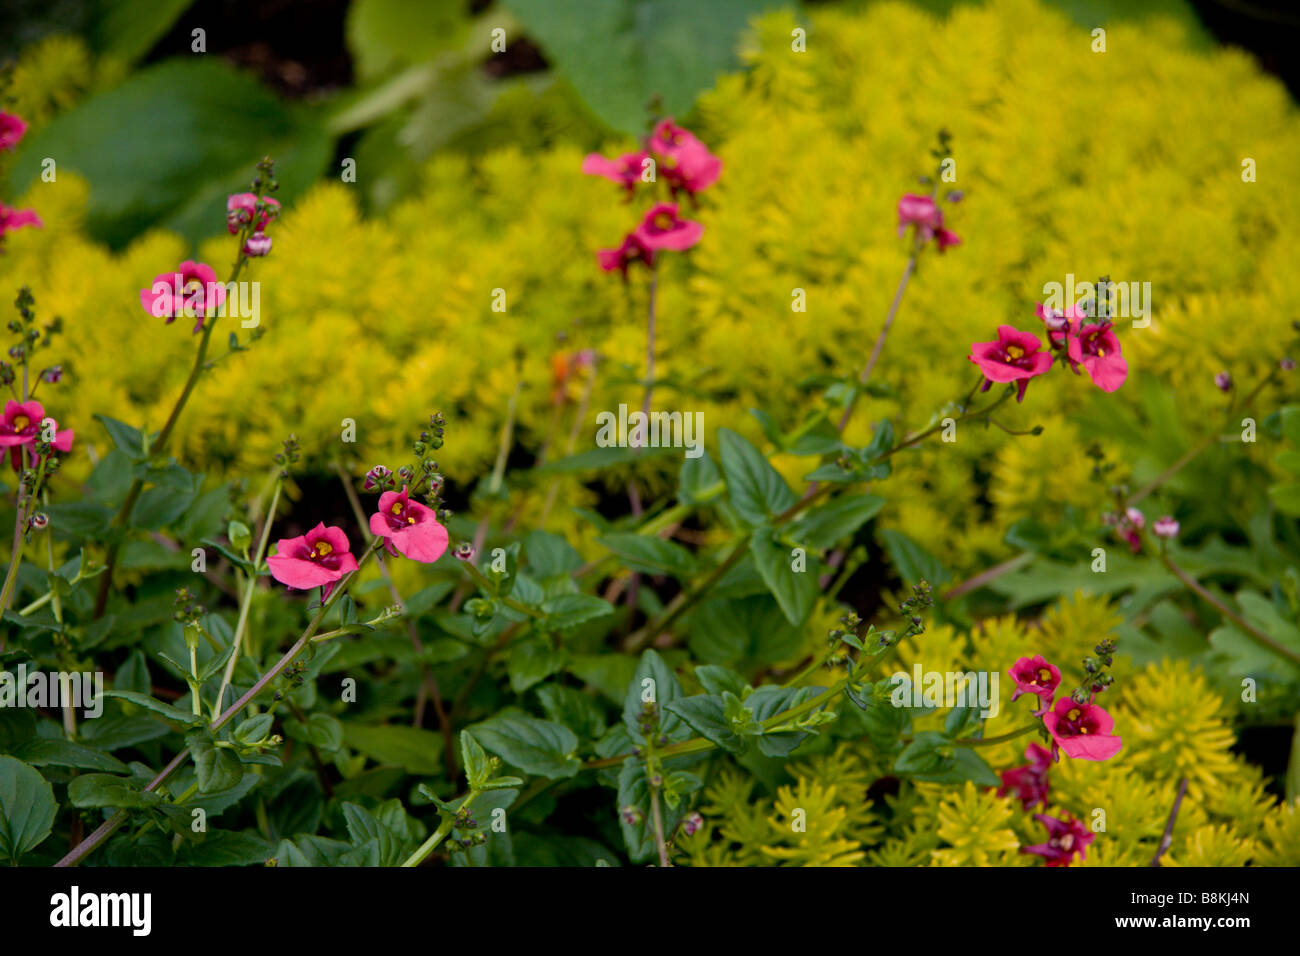 Diascia 'Coral Belle' grows in front of a clump of Sedum rupestre 'Angelina' in a garden in South Carolina. Stock Photo